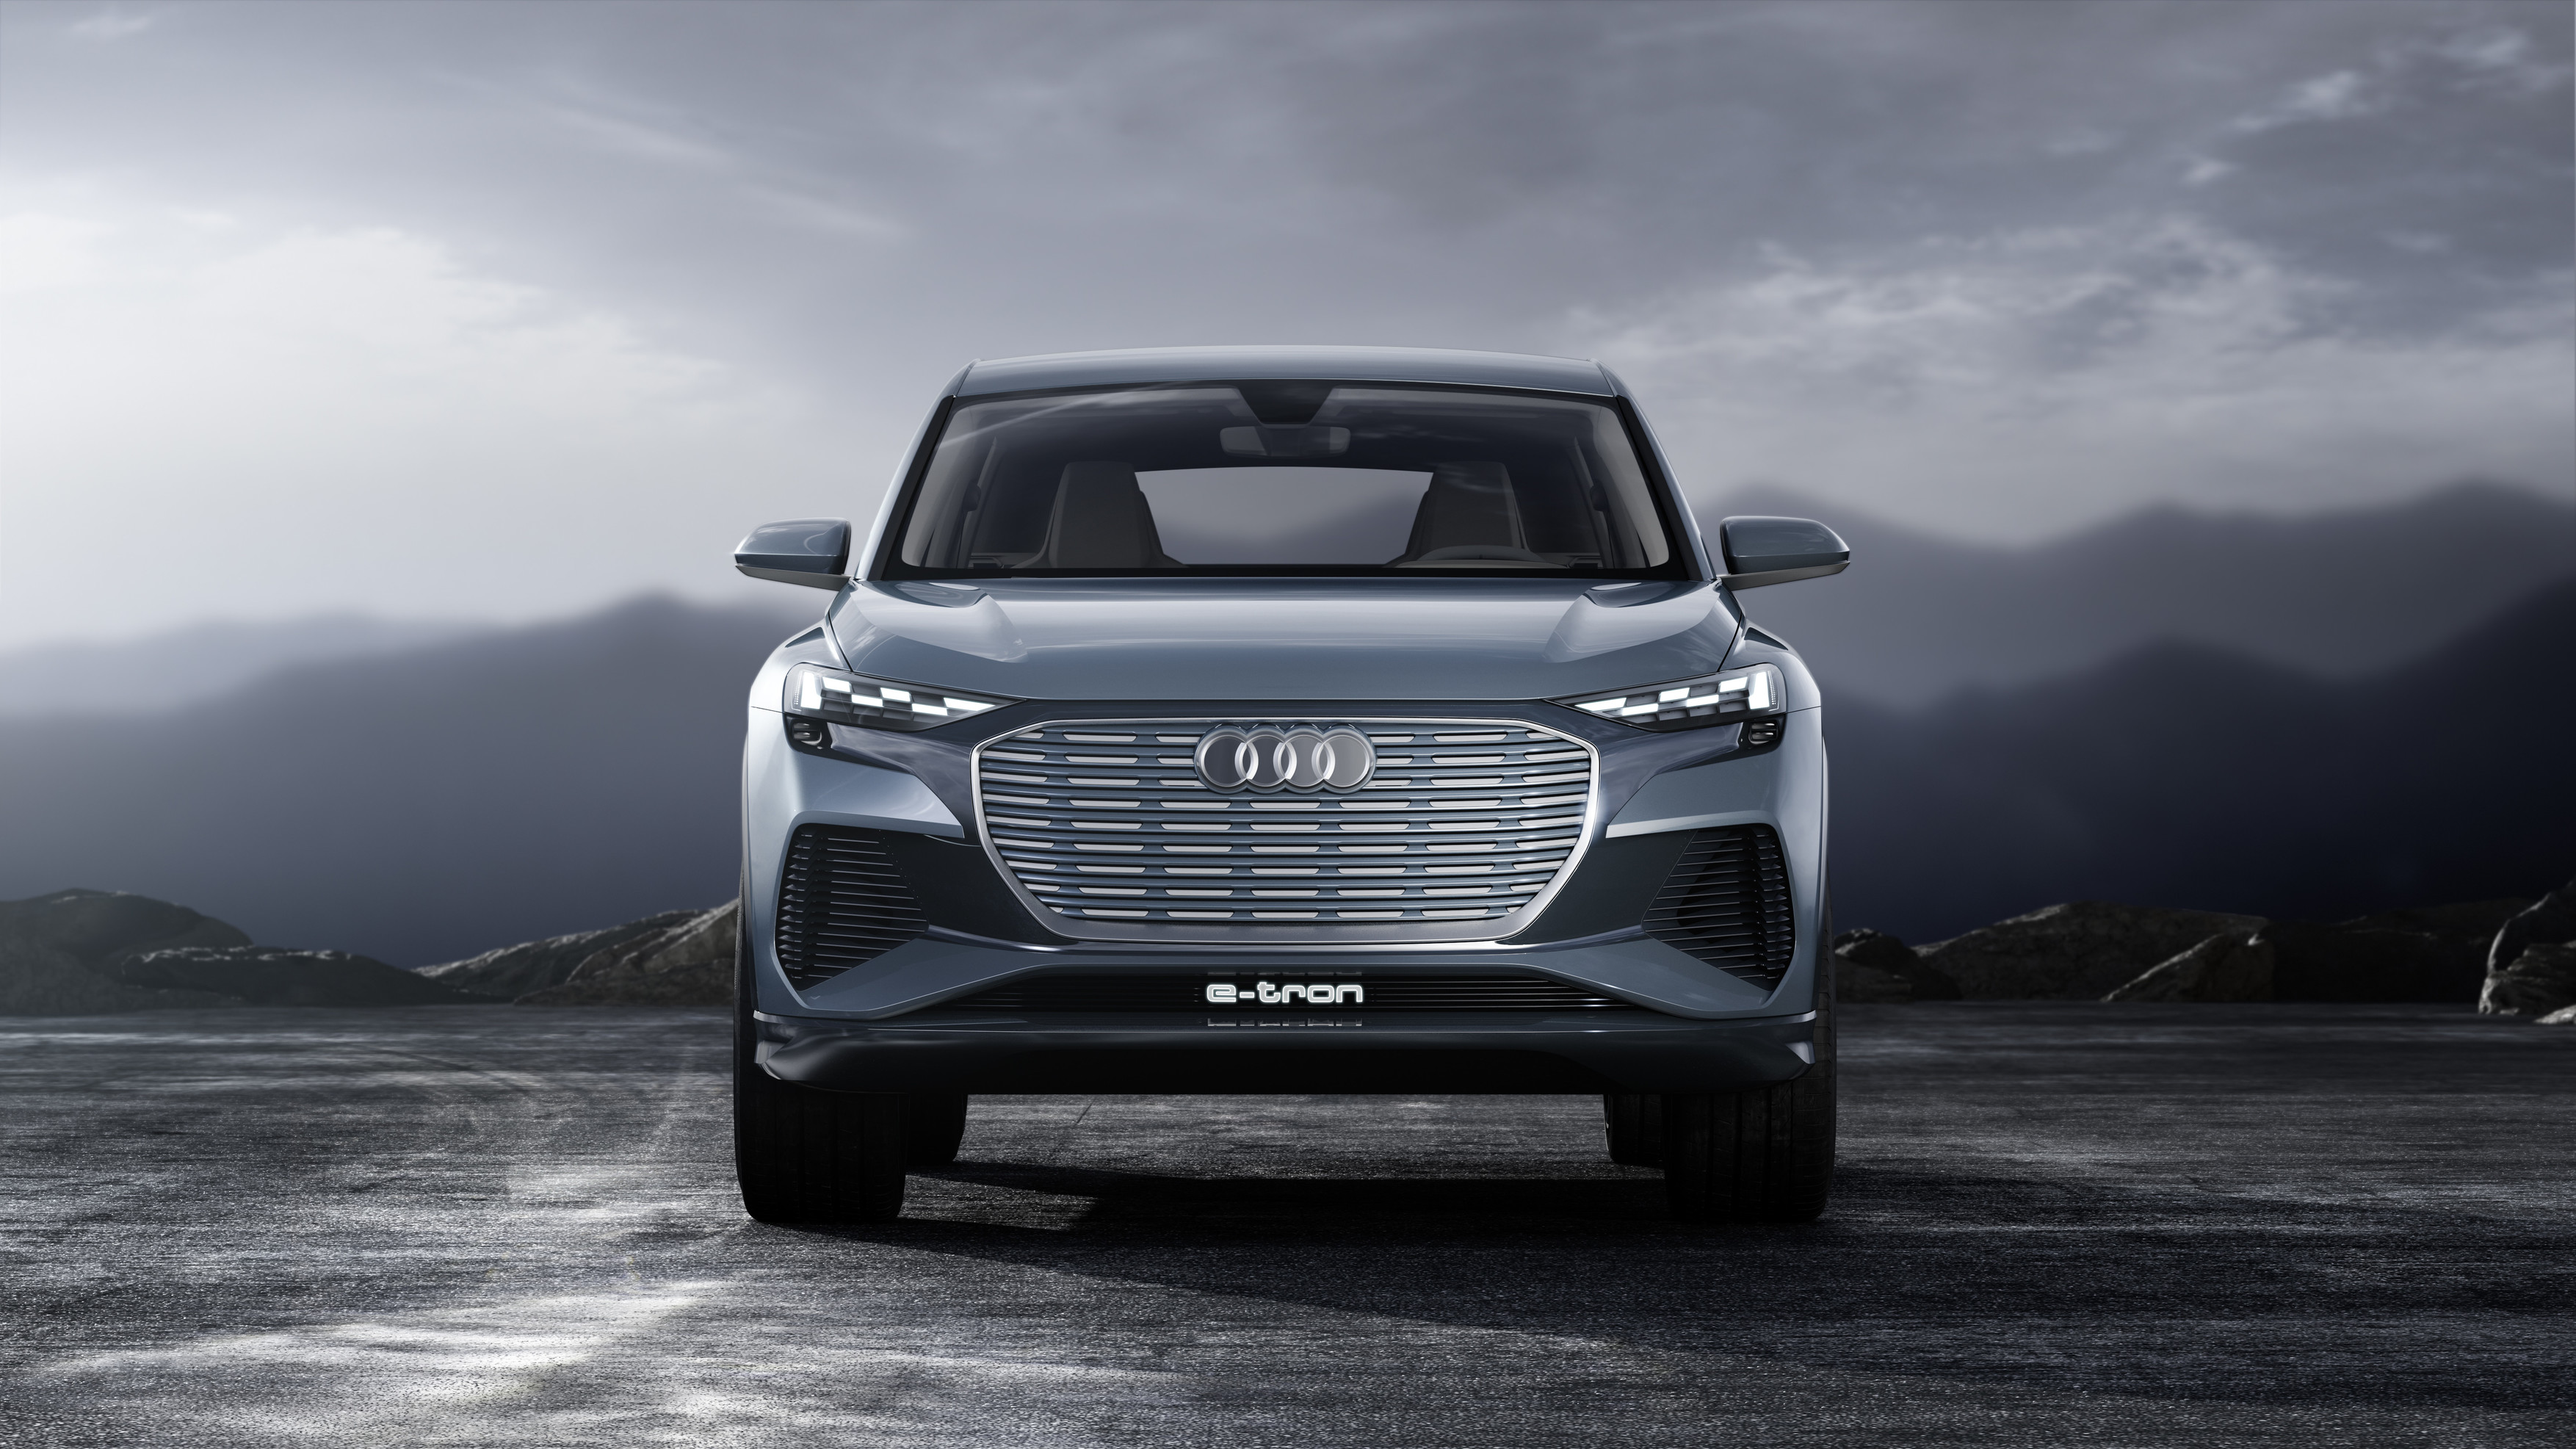 Audi S New Q4 E Tron Concept Is A Compact Electric Crossover With 280 Miles Of Range Internet Technology News - ember moon tron mine roblox